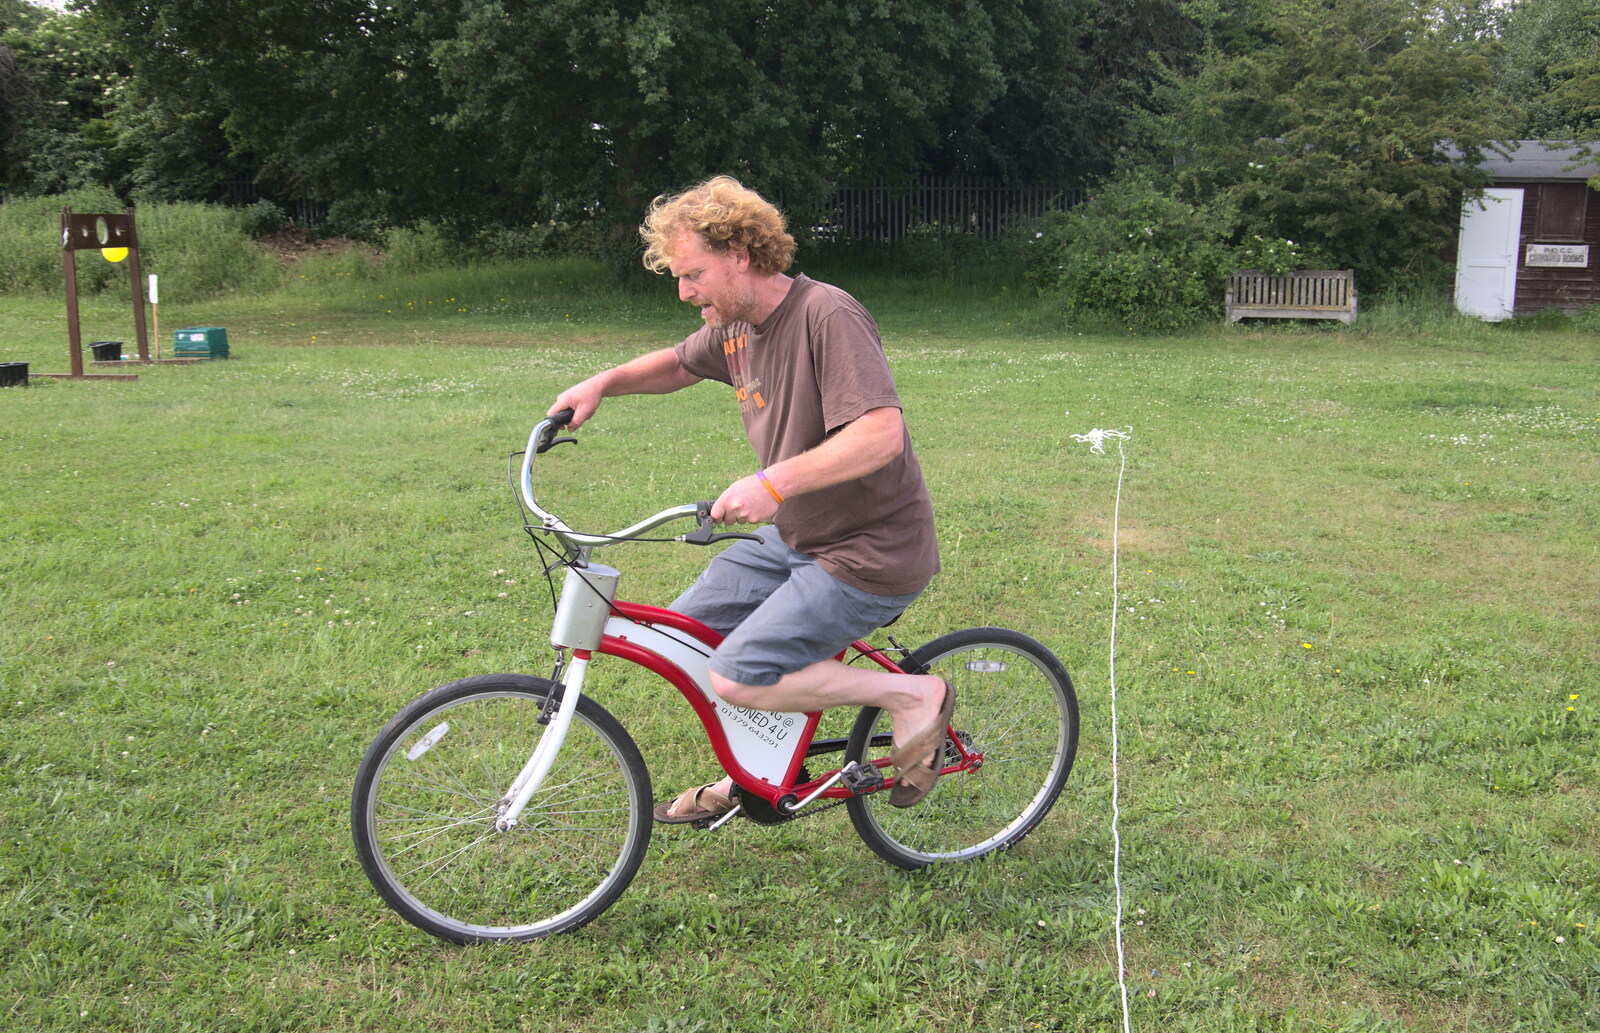 Wavy tries to ride a bike with reversed steering from The Not-Opening of the Palgrave Playground, Palgrave, Suffolk - 3rd June 2018